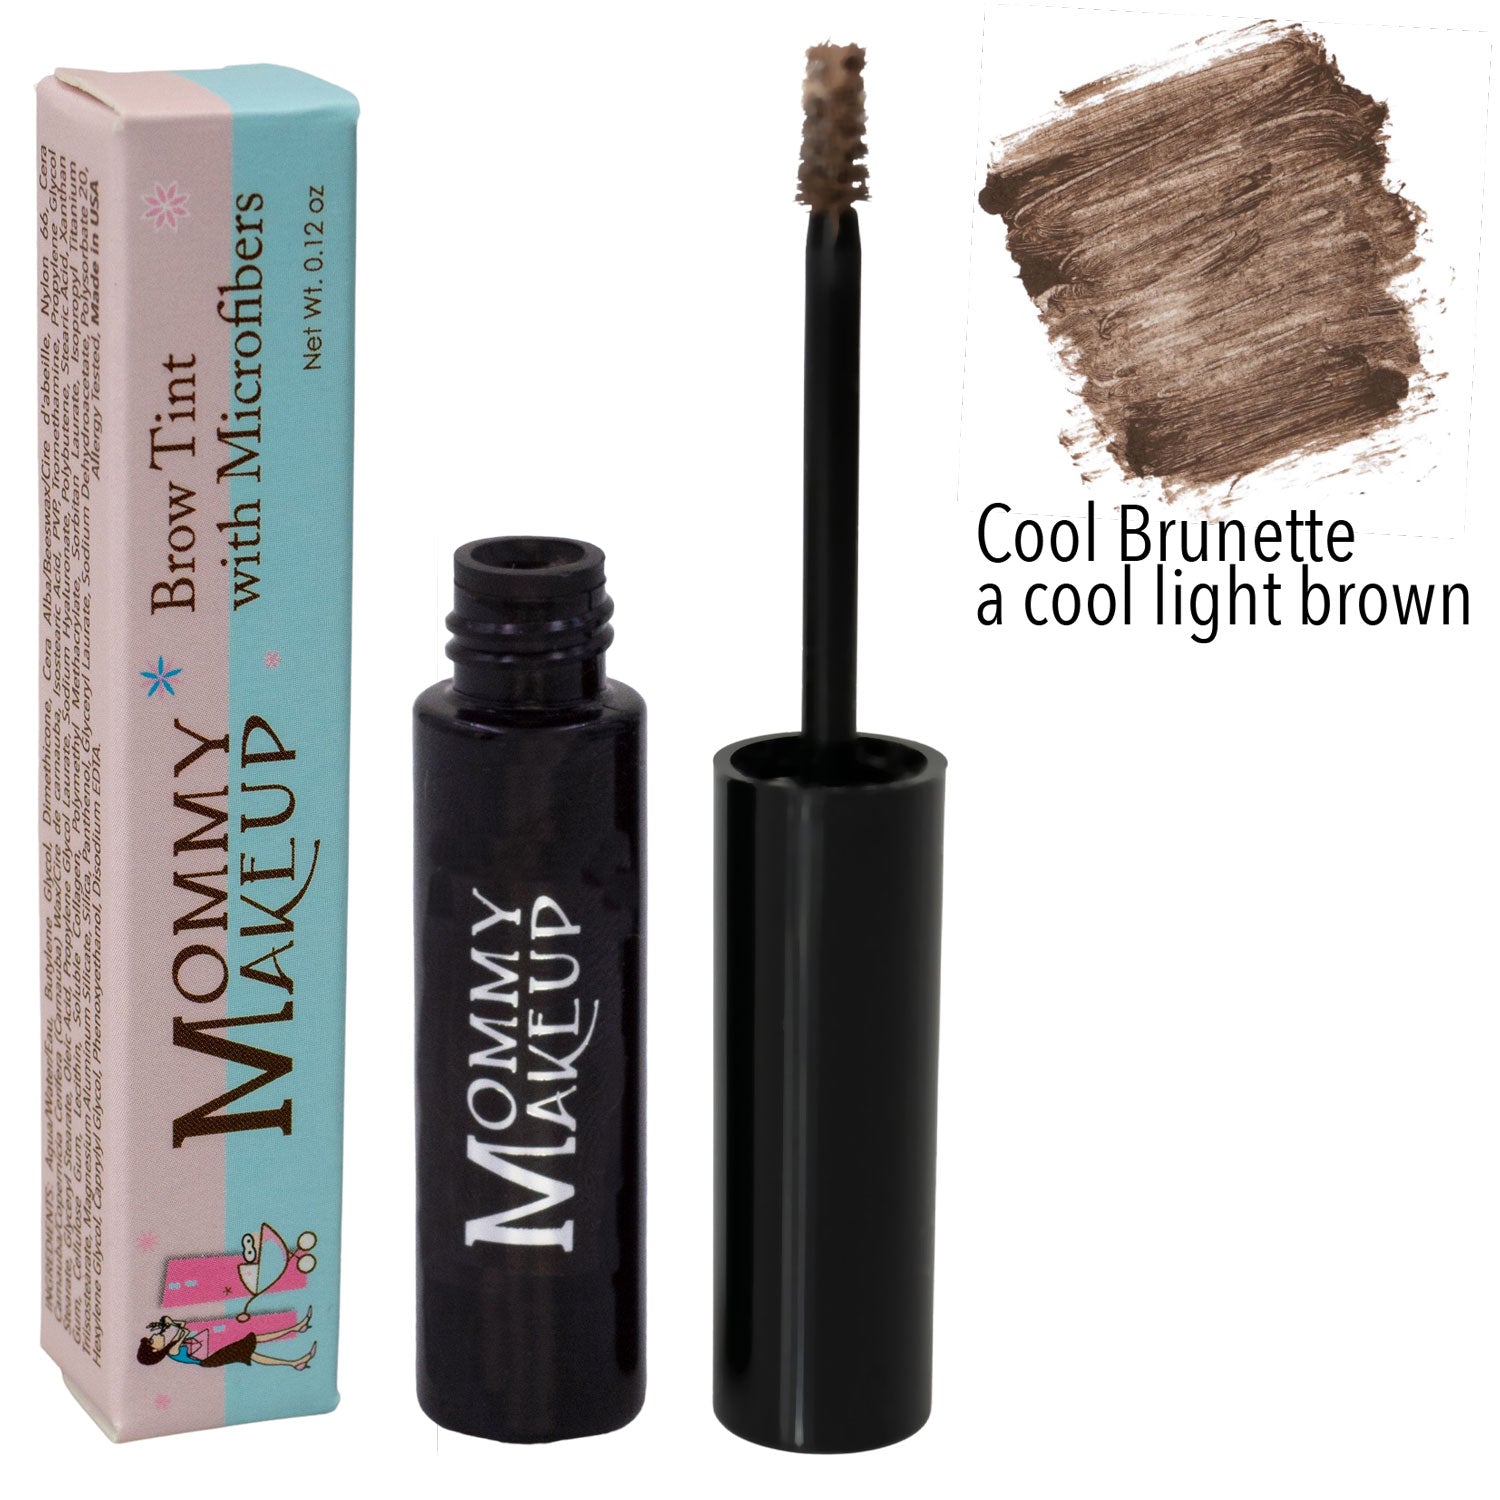 Brow Tint with Microfibers - Cool Brunette by Mommy Makeup for a balanced and bright eye! Tinted Eyebrow Gel. Clump-free, paraben-free, talc free, allergy tested, PETA certified cruelty free.